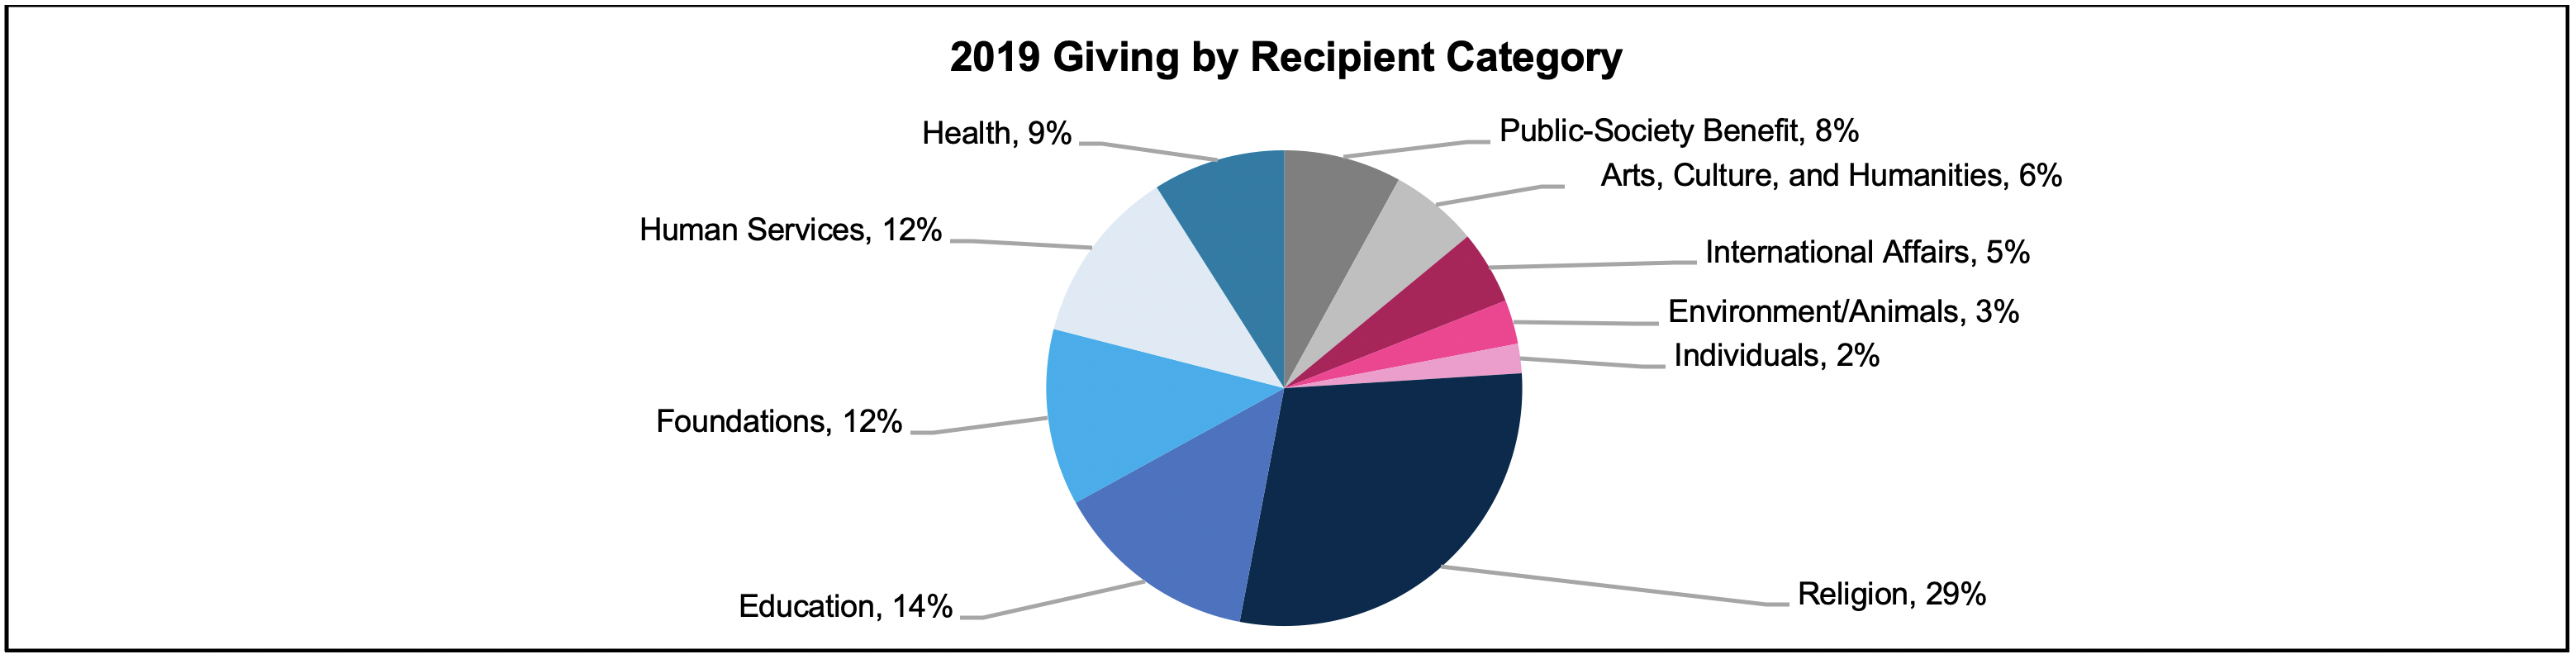 2019 Giving by Recipient Category Recent Trends in Philanthropic Giving